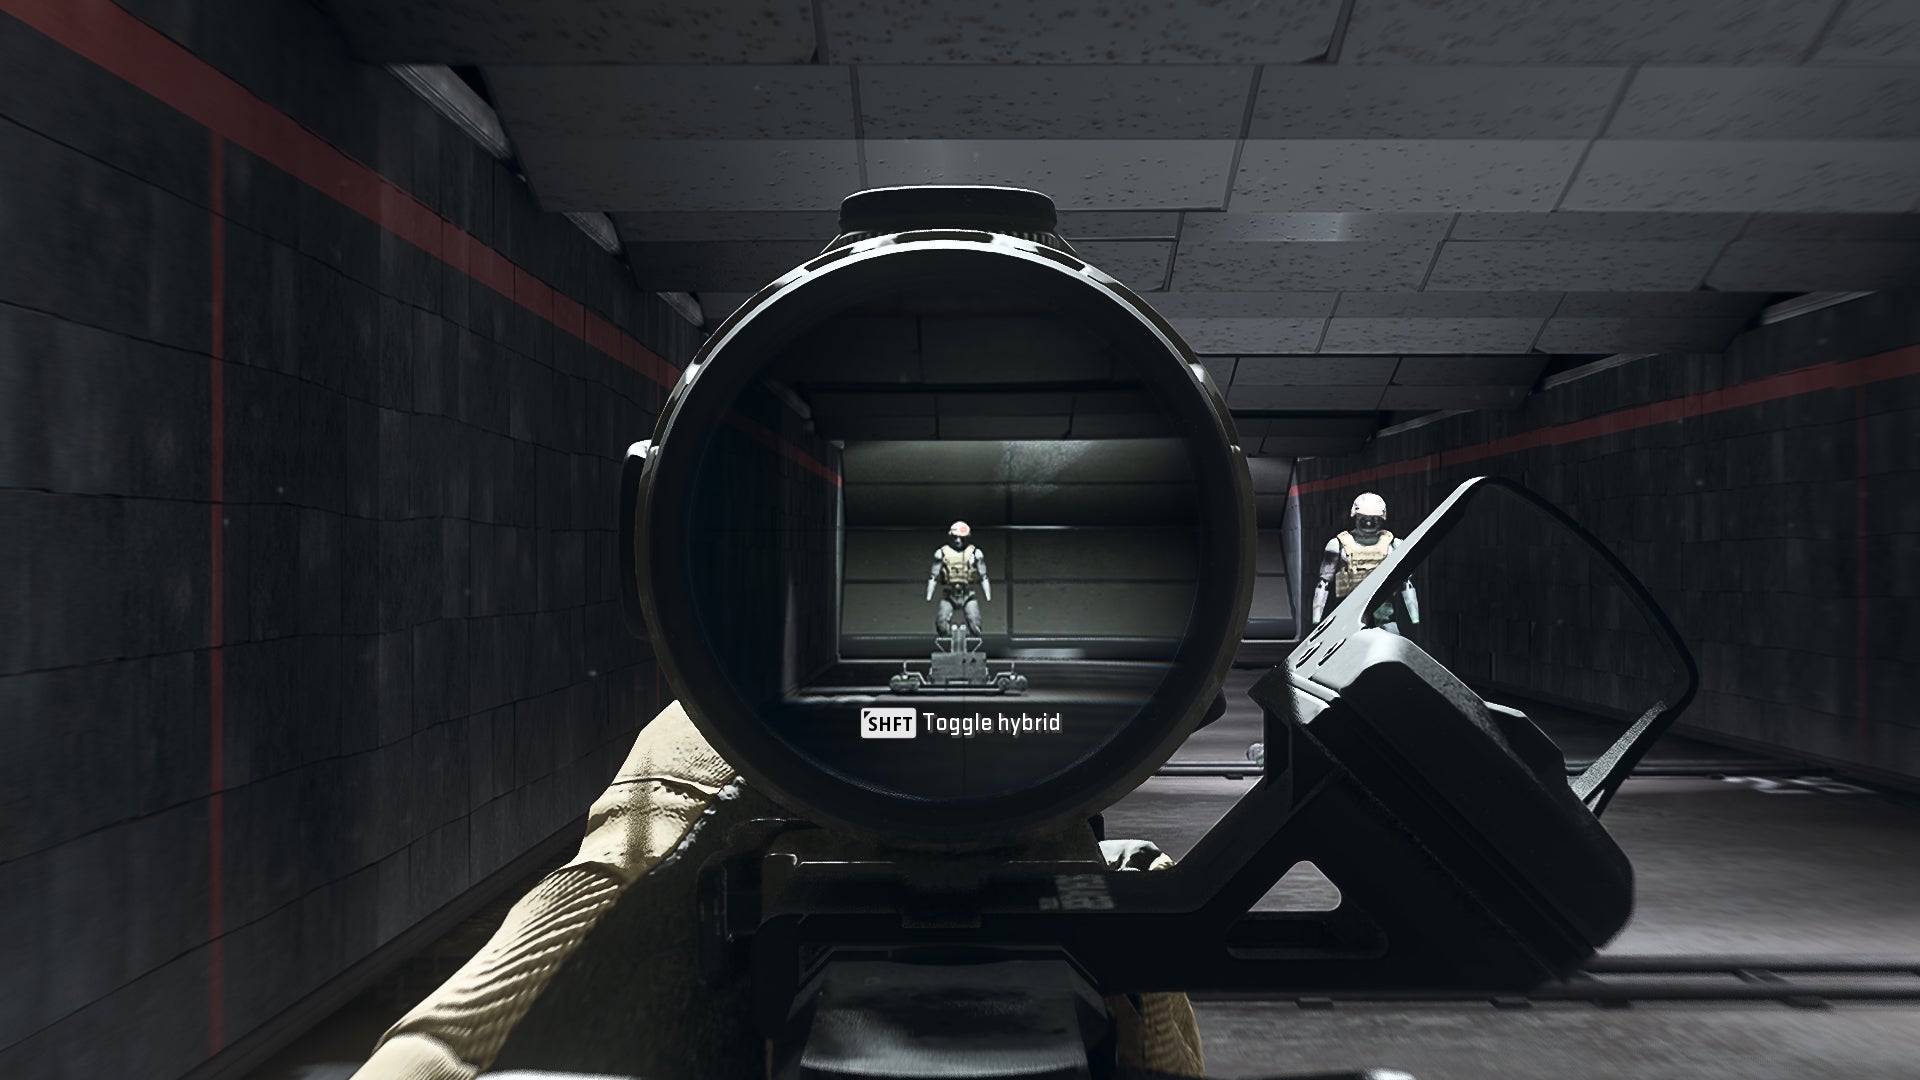 The player in Warzone 2.0 aims at a training dummy using the BPZ40 Hybrid optic attachment.